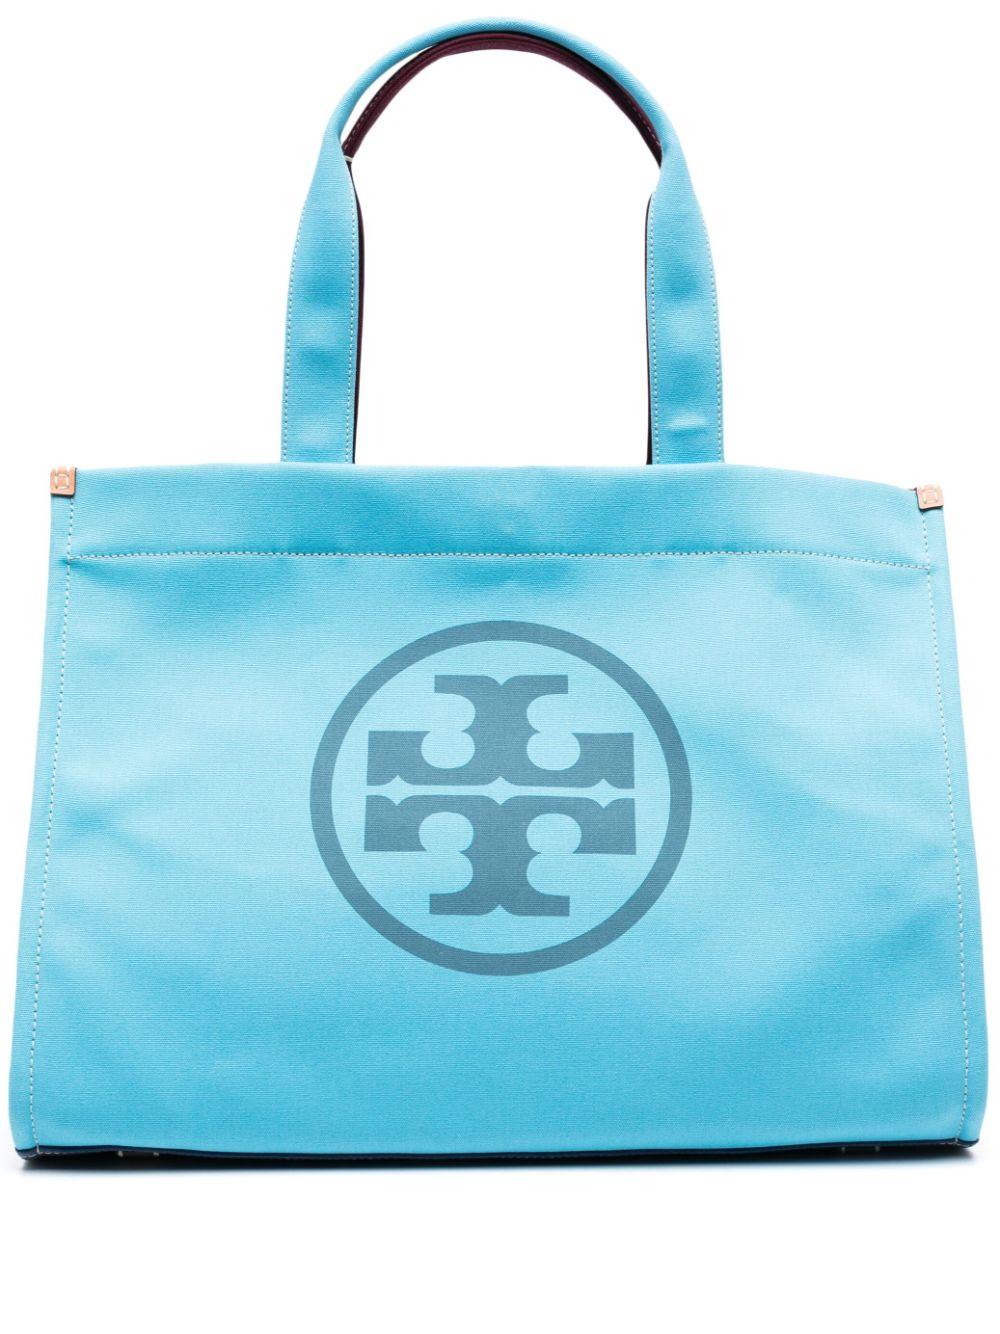 Perry Color-Block Triple-Compartment Tote: Women's Designer Tote Bags |  Tory Burch